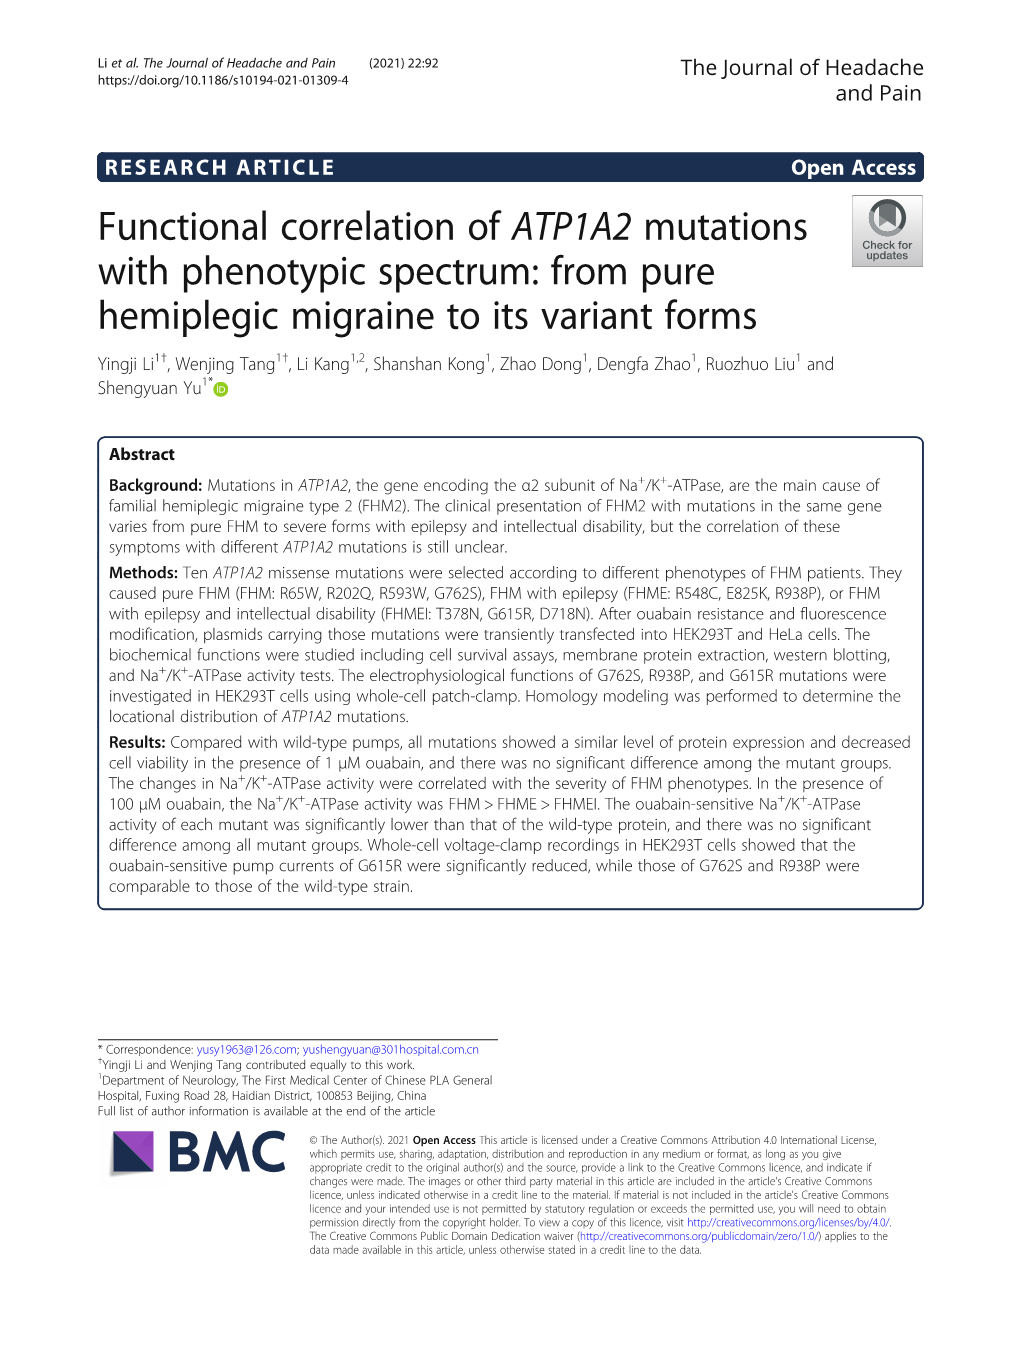 Functional Correlation of ATP1A2 Mutations with Phenotypic Spectrum